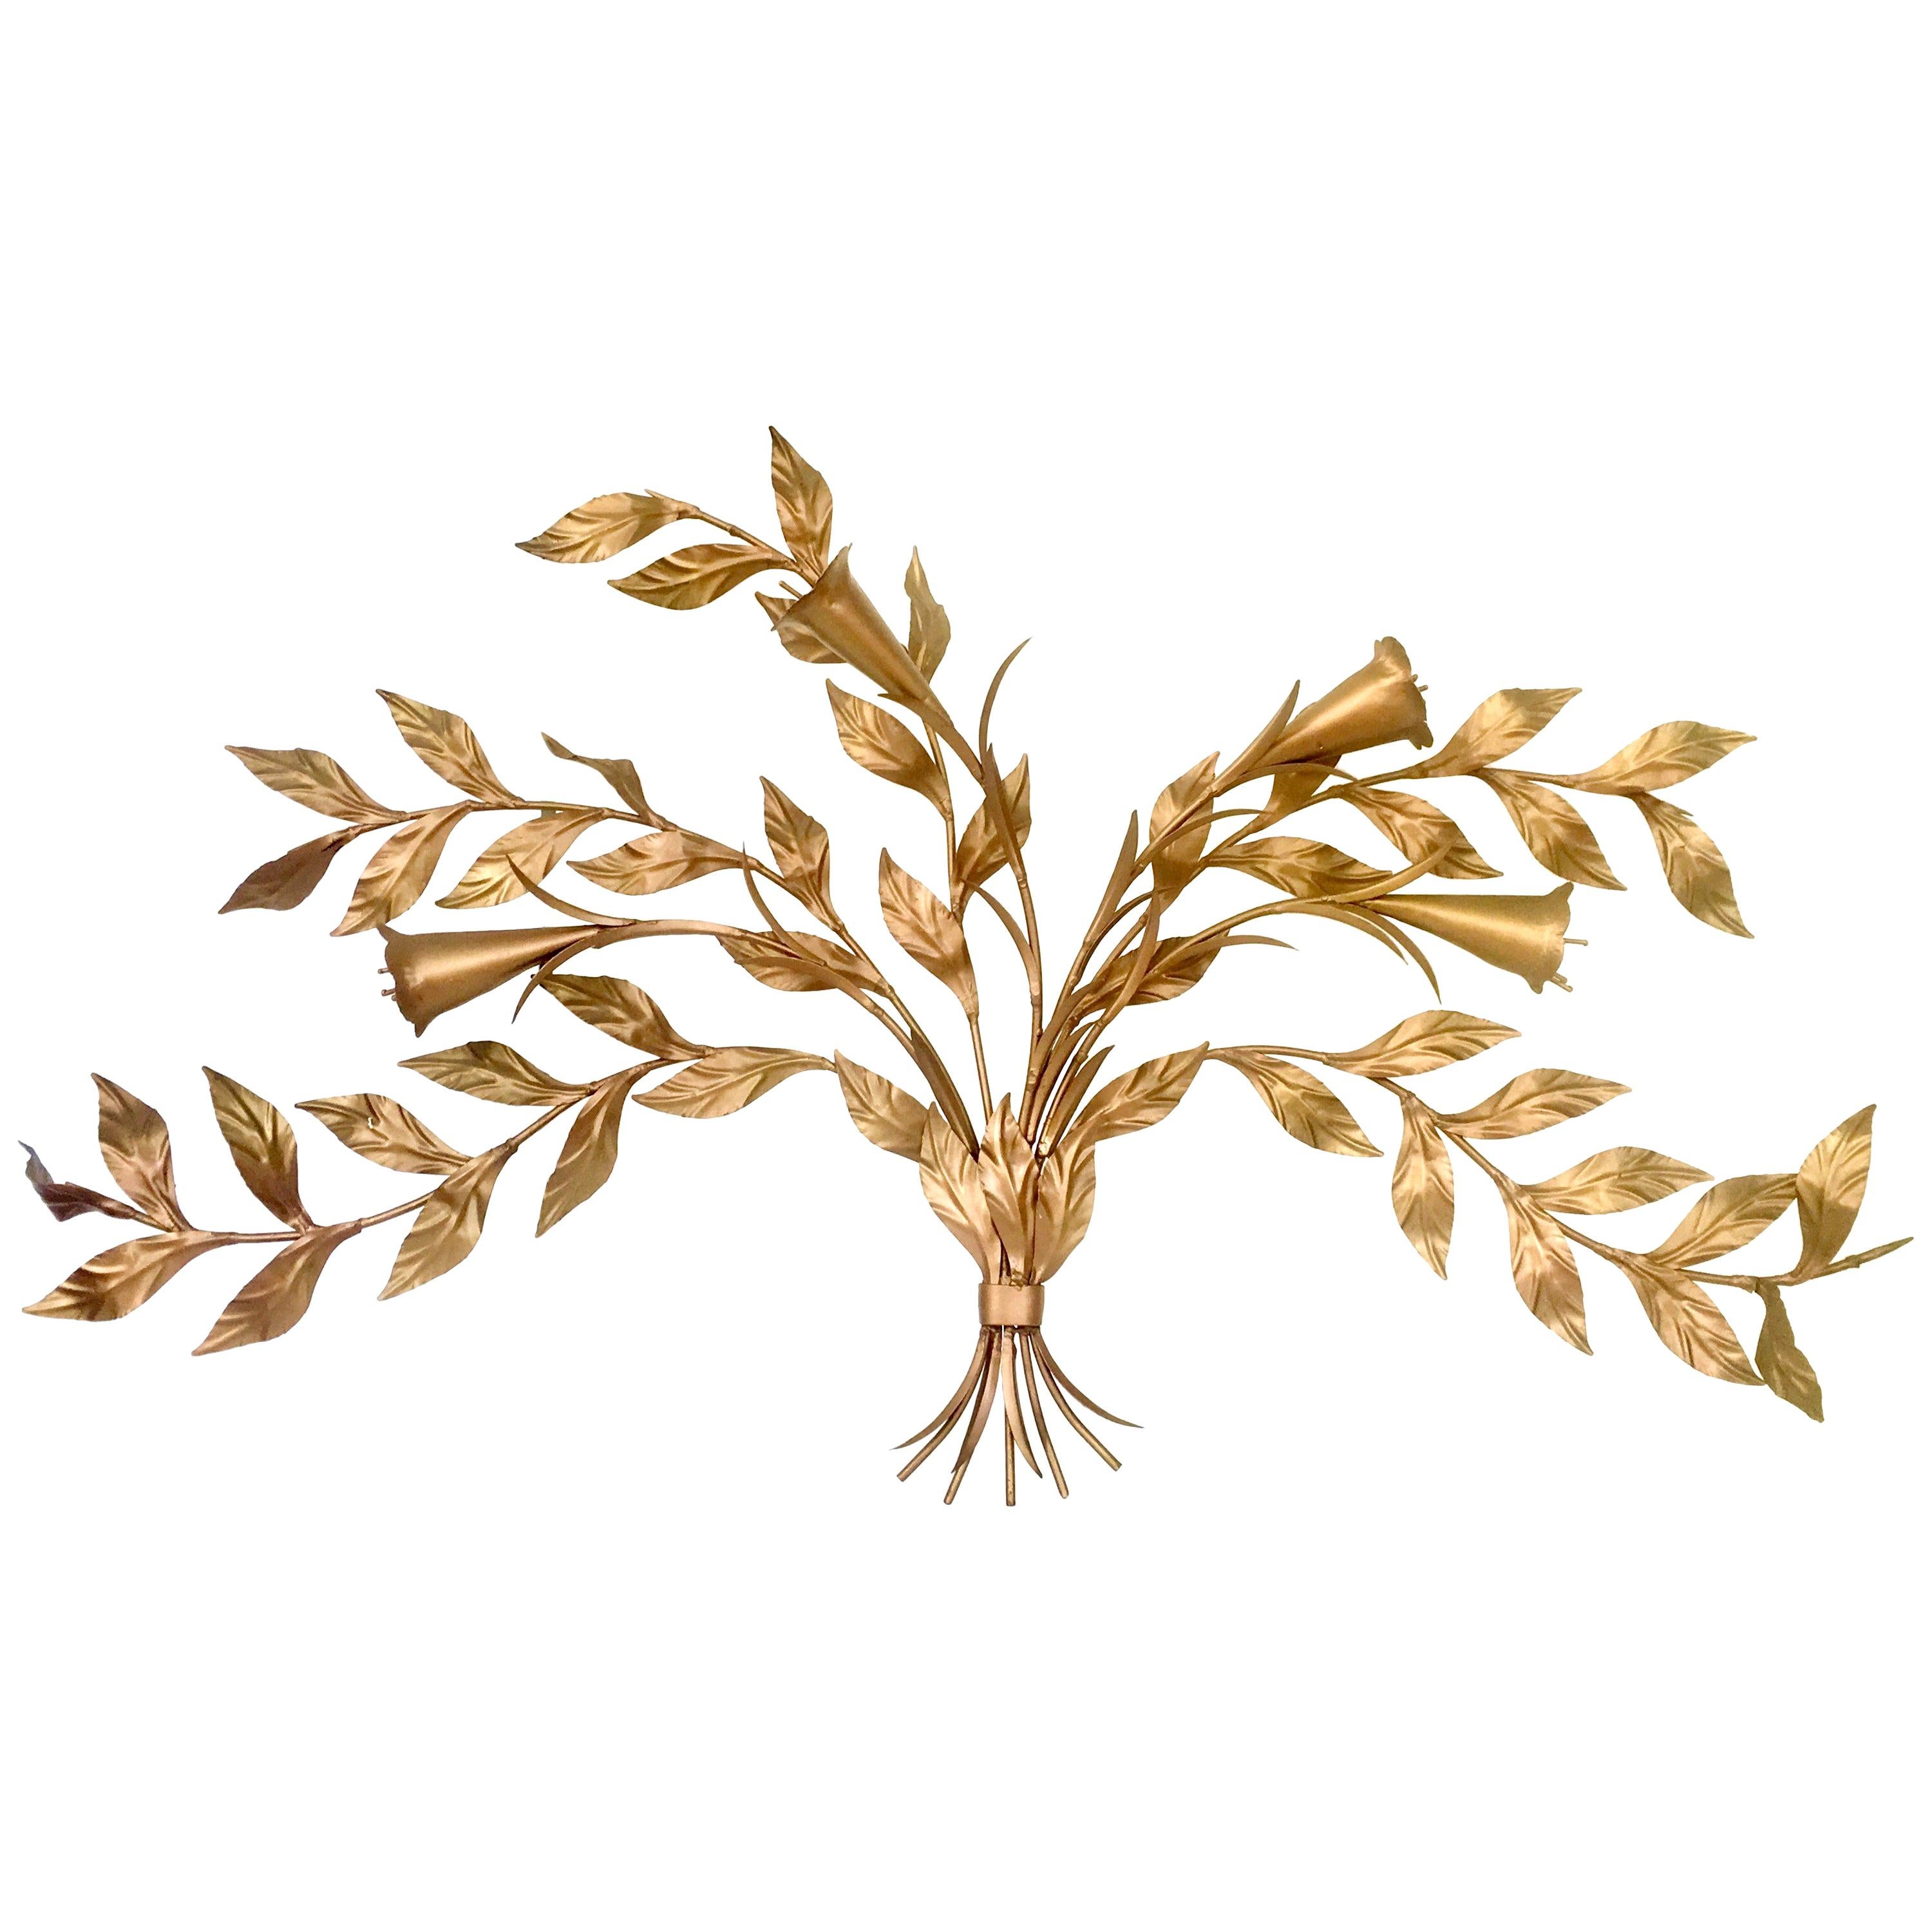 1950s Monumental Italian Gold Floral Sheaf Wall Sculpture by Florentia